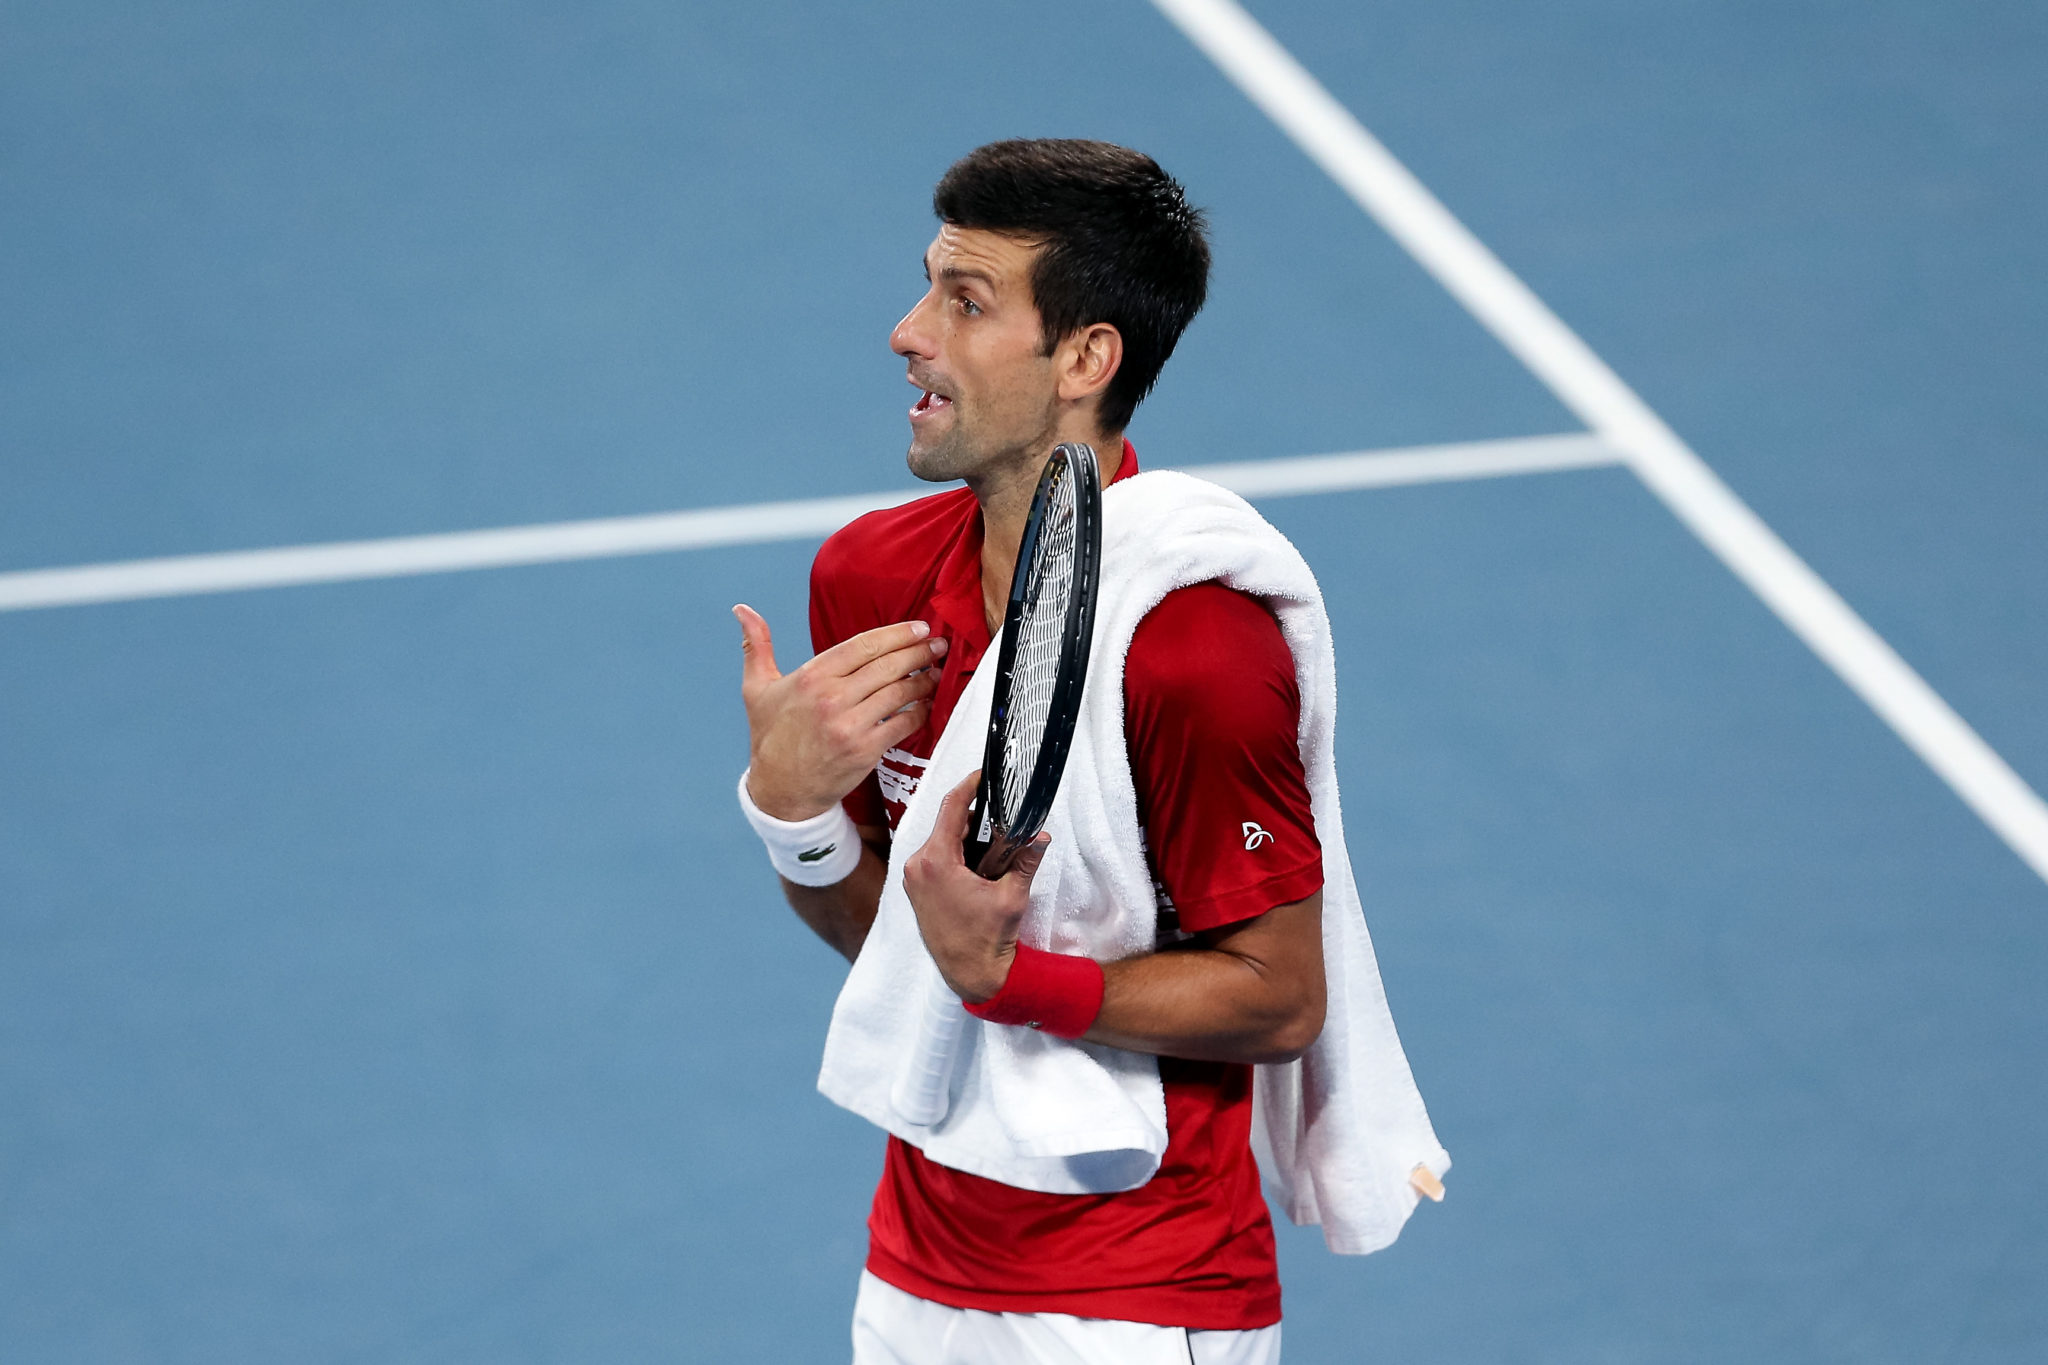 Novak Djokovic talks with the umpire during the 2020 US Open